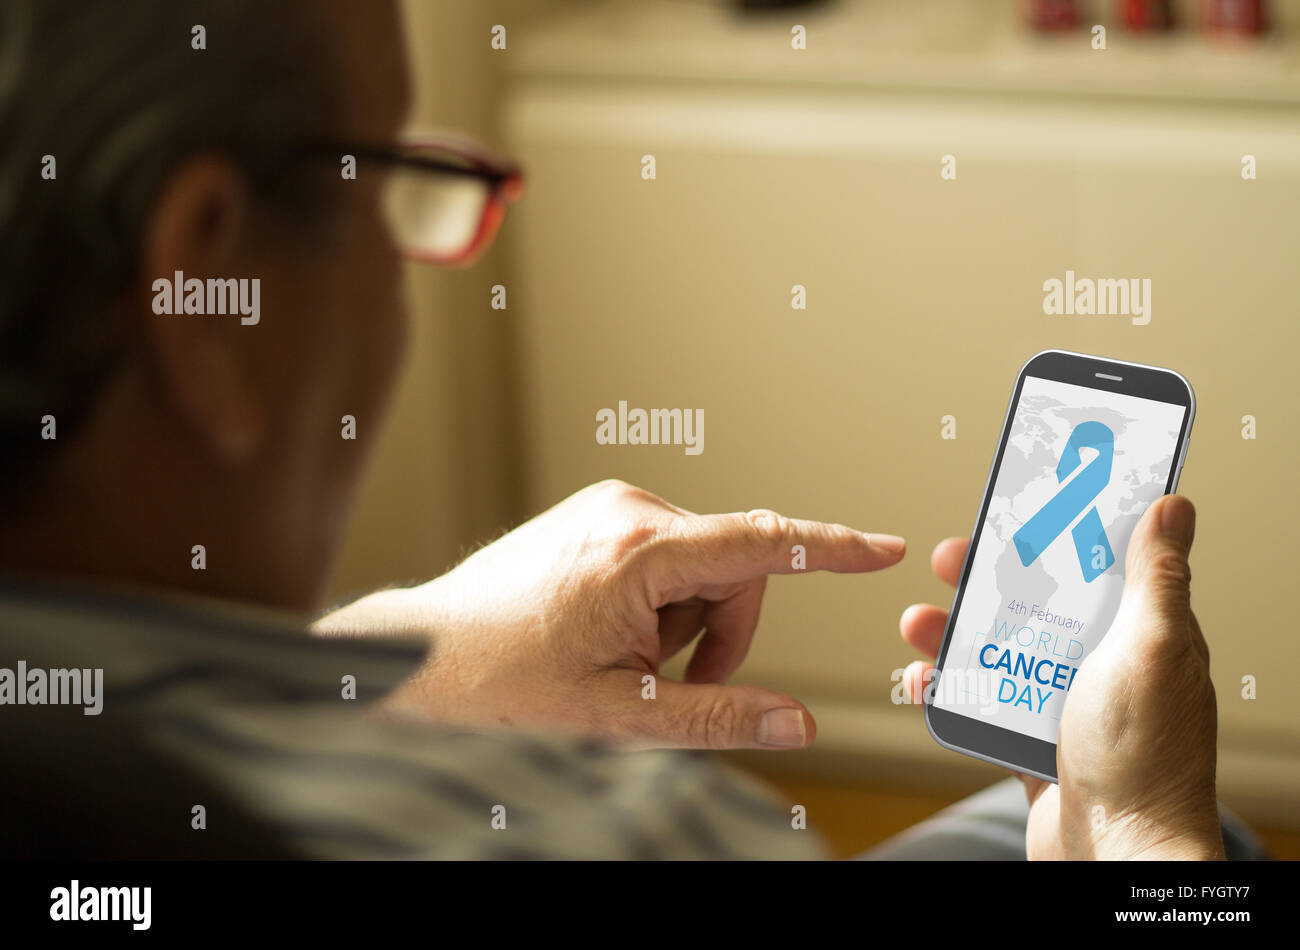 business concept: man with World Cancer Day background on screen phone at home. All screen graphics are made up. Stock Photo